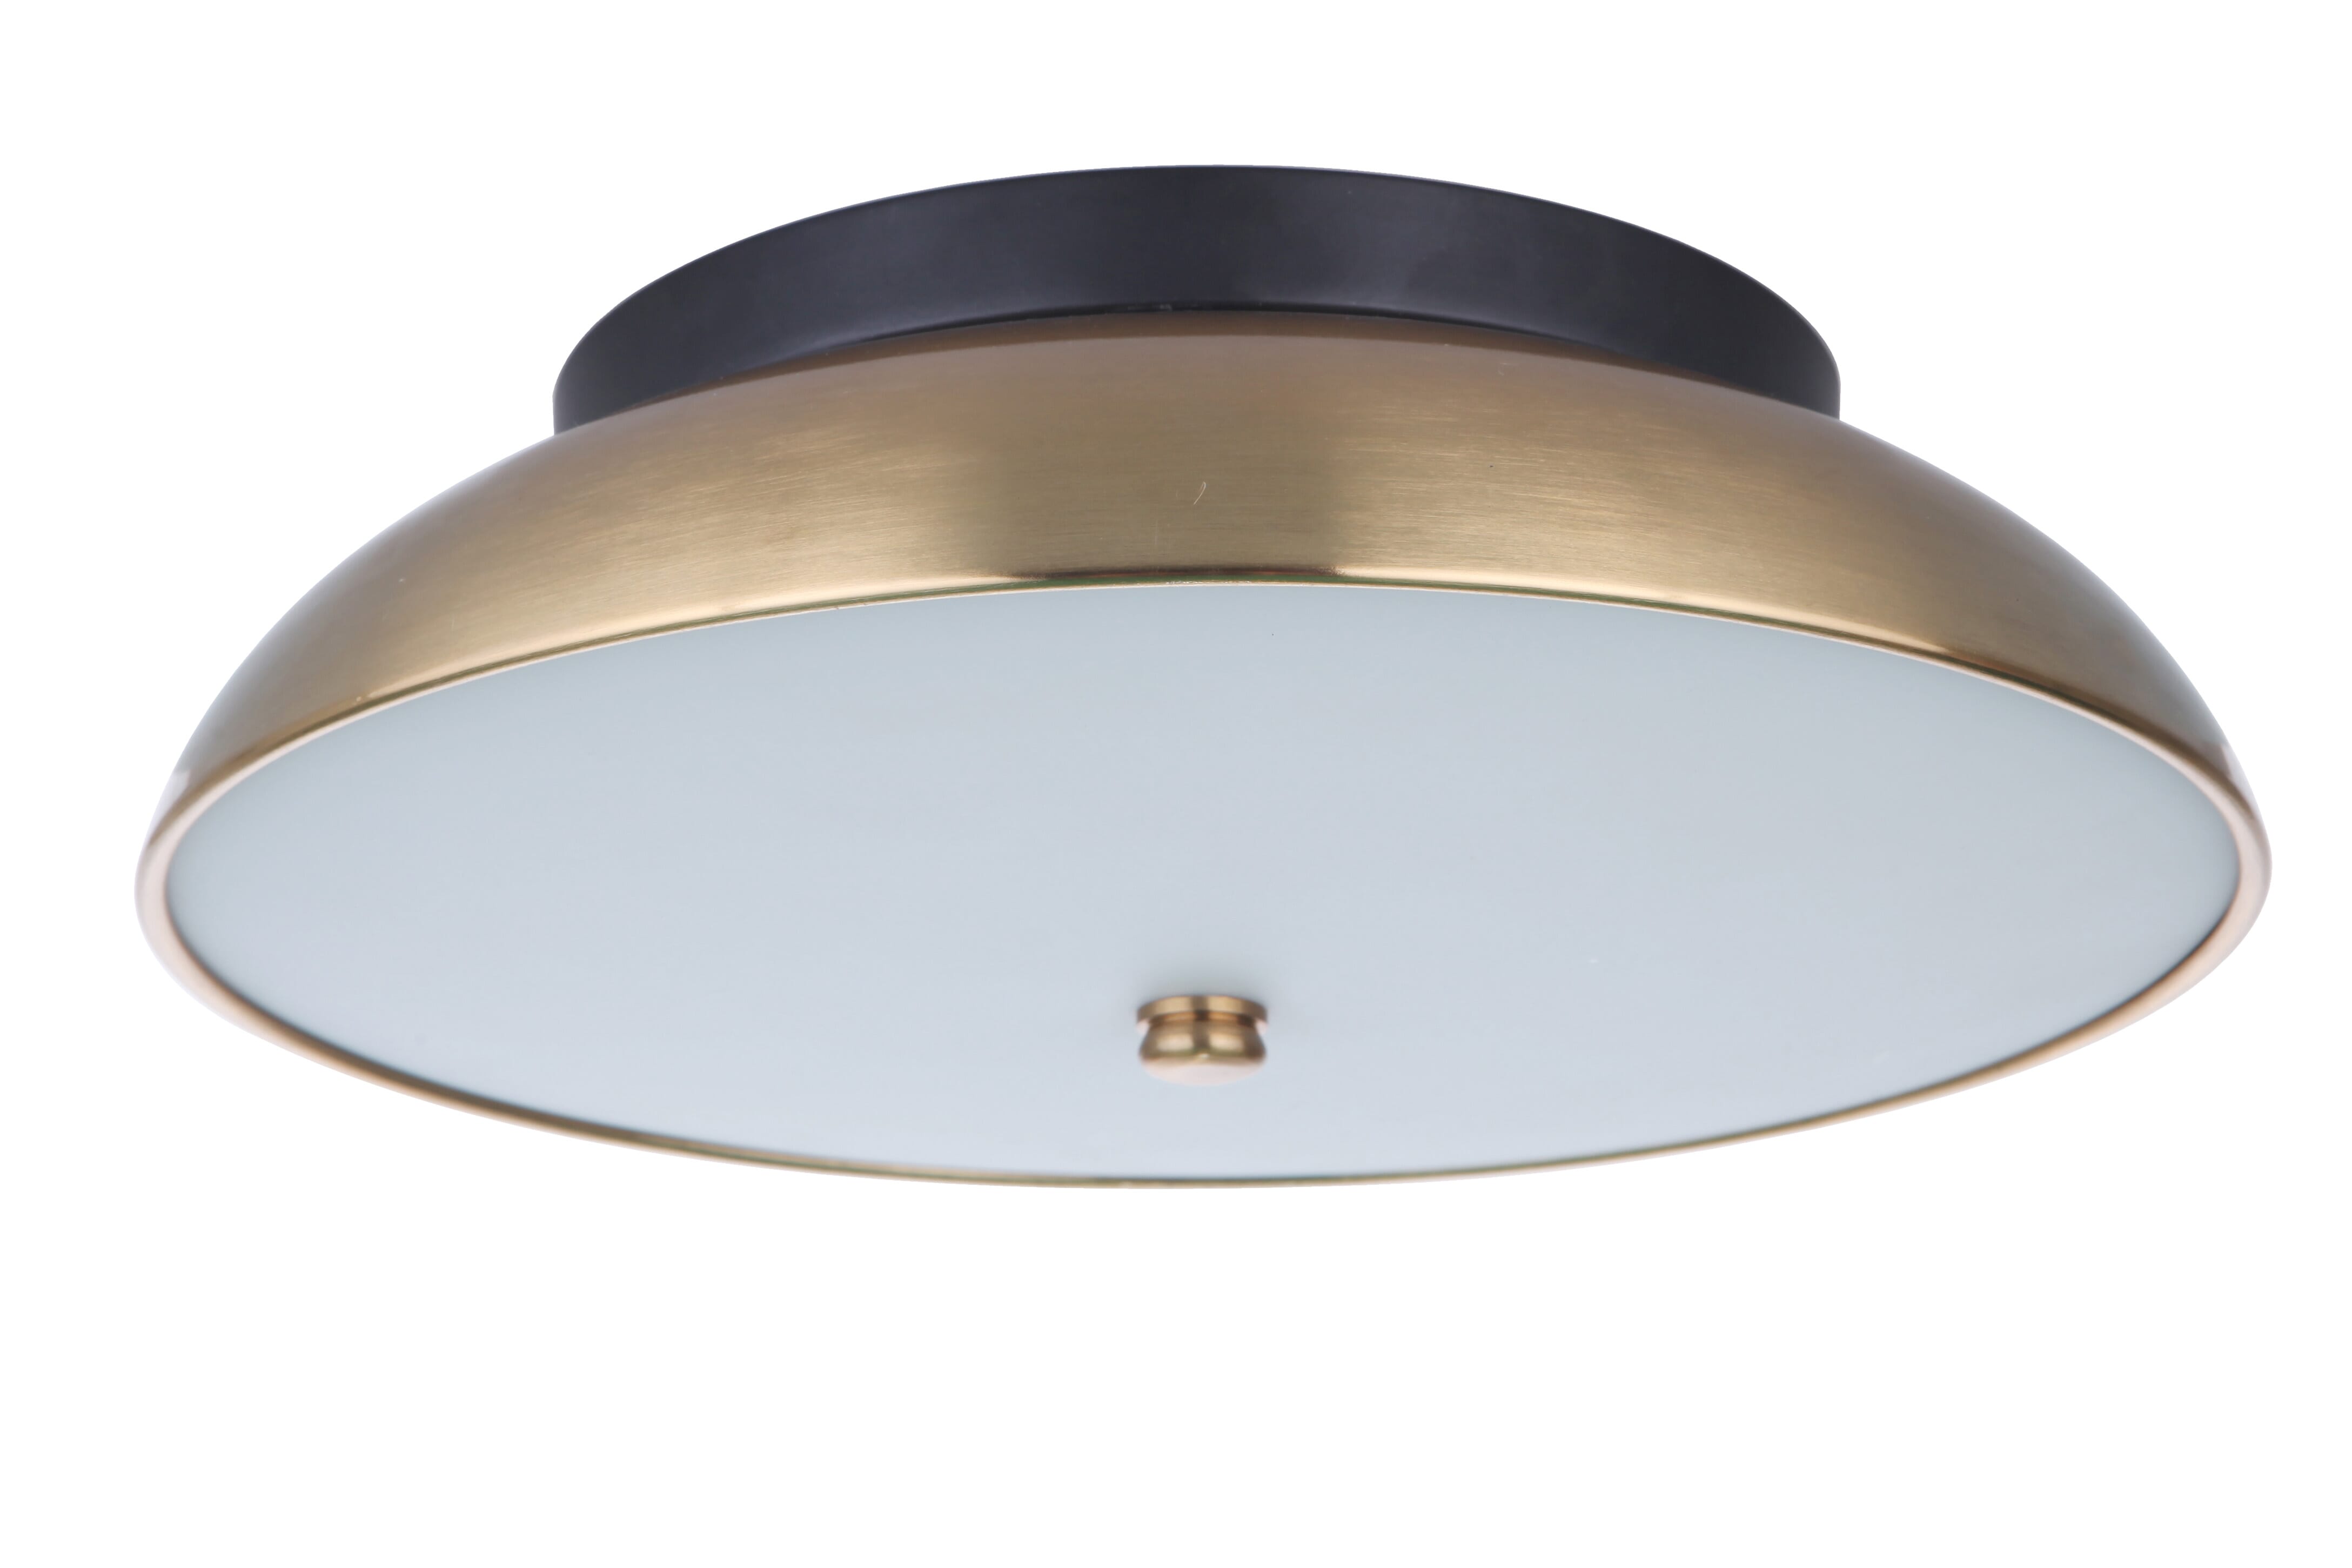 Craftmade Soul Ceiling Light in Flat Black with Satin Brass